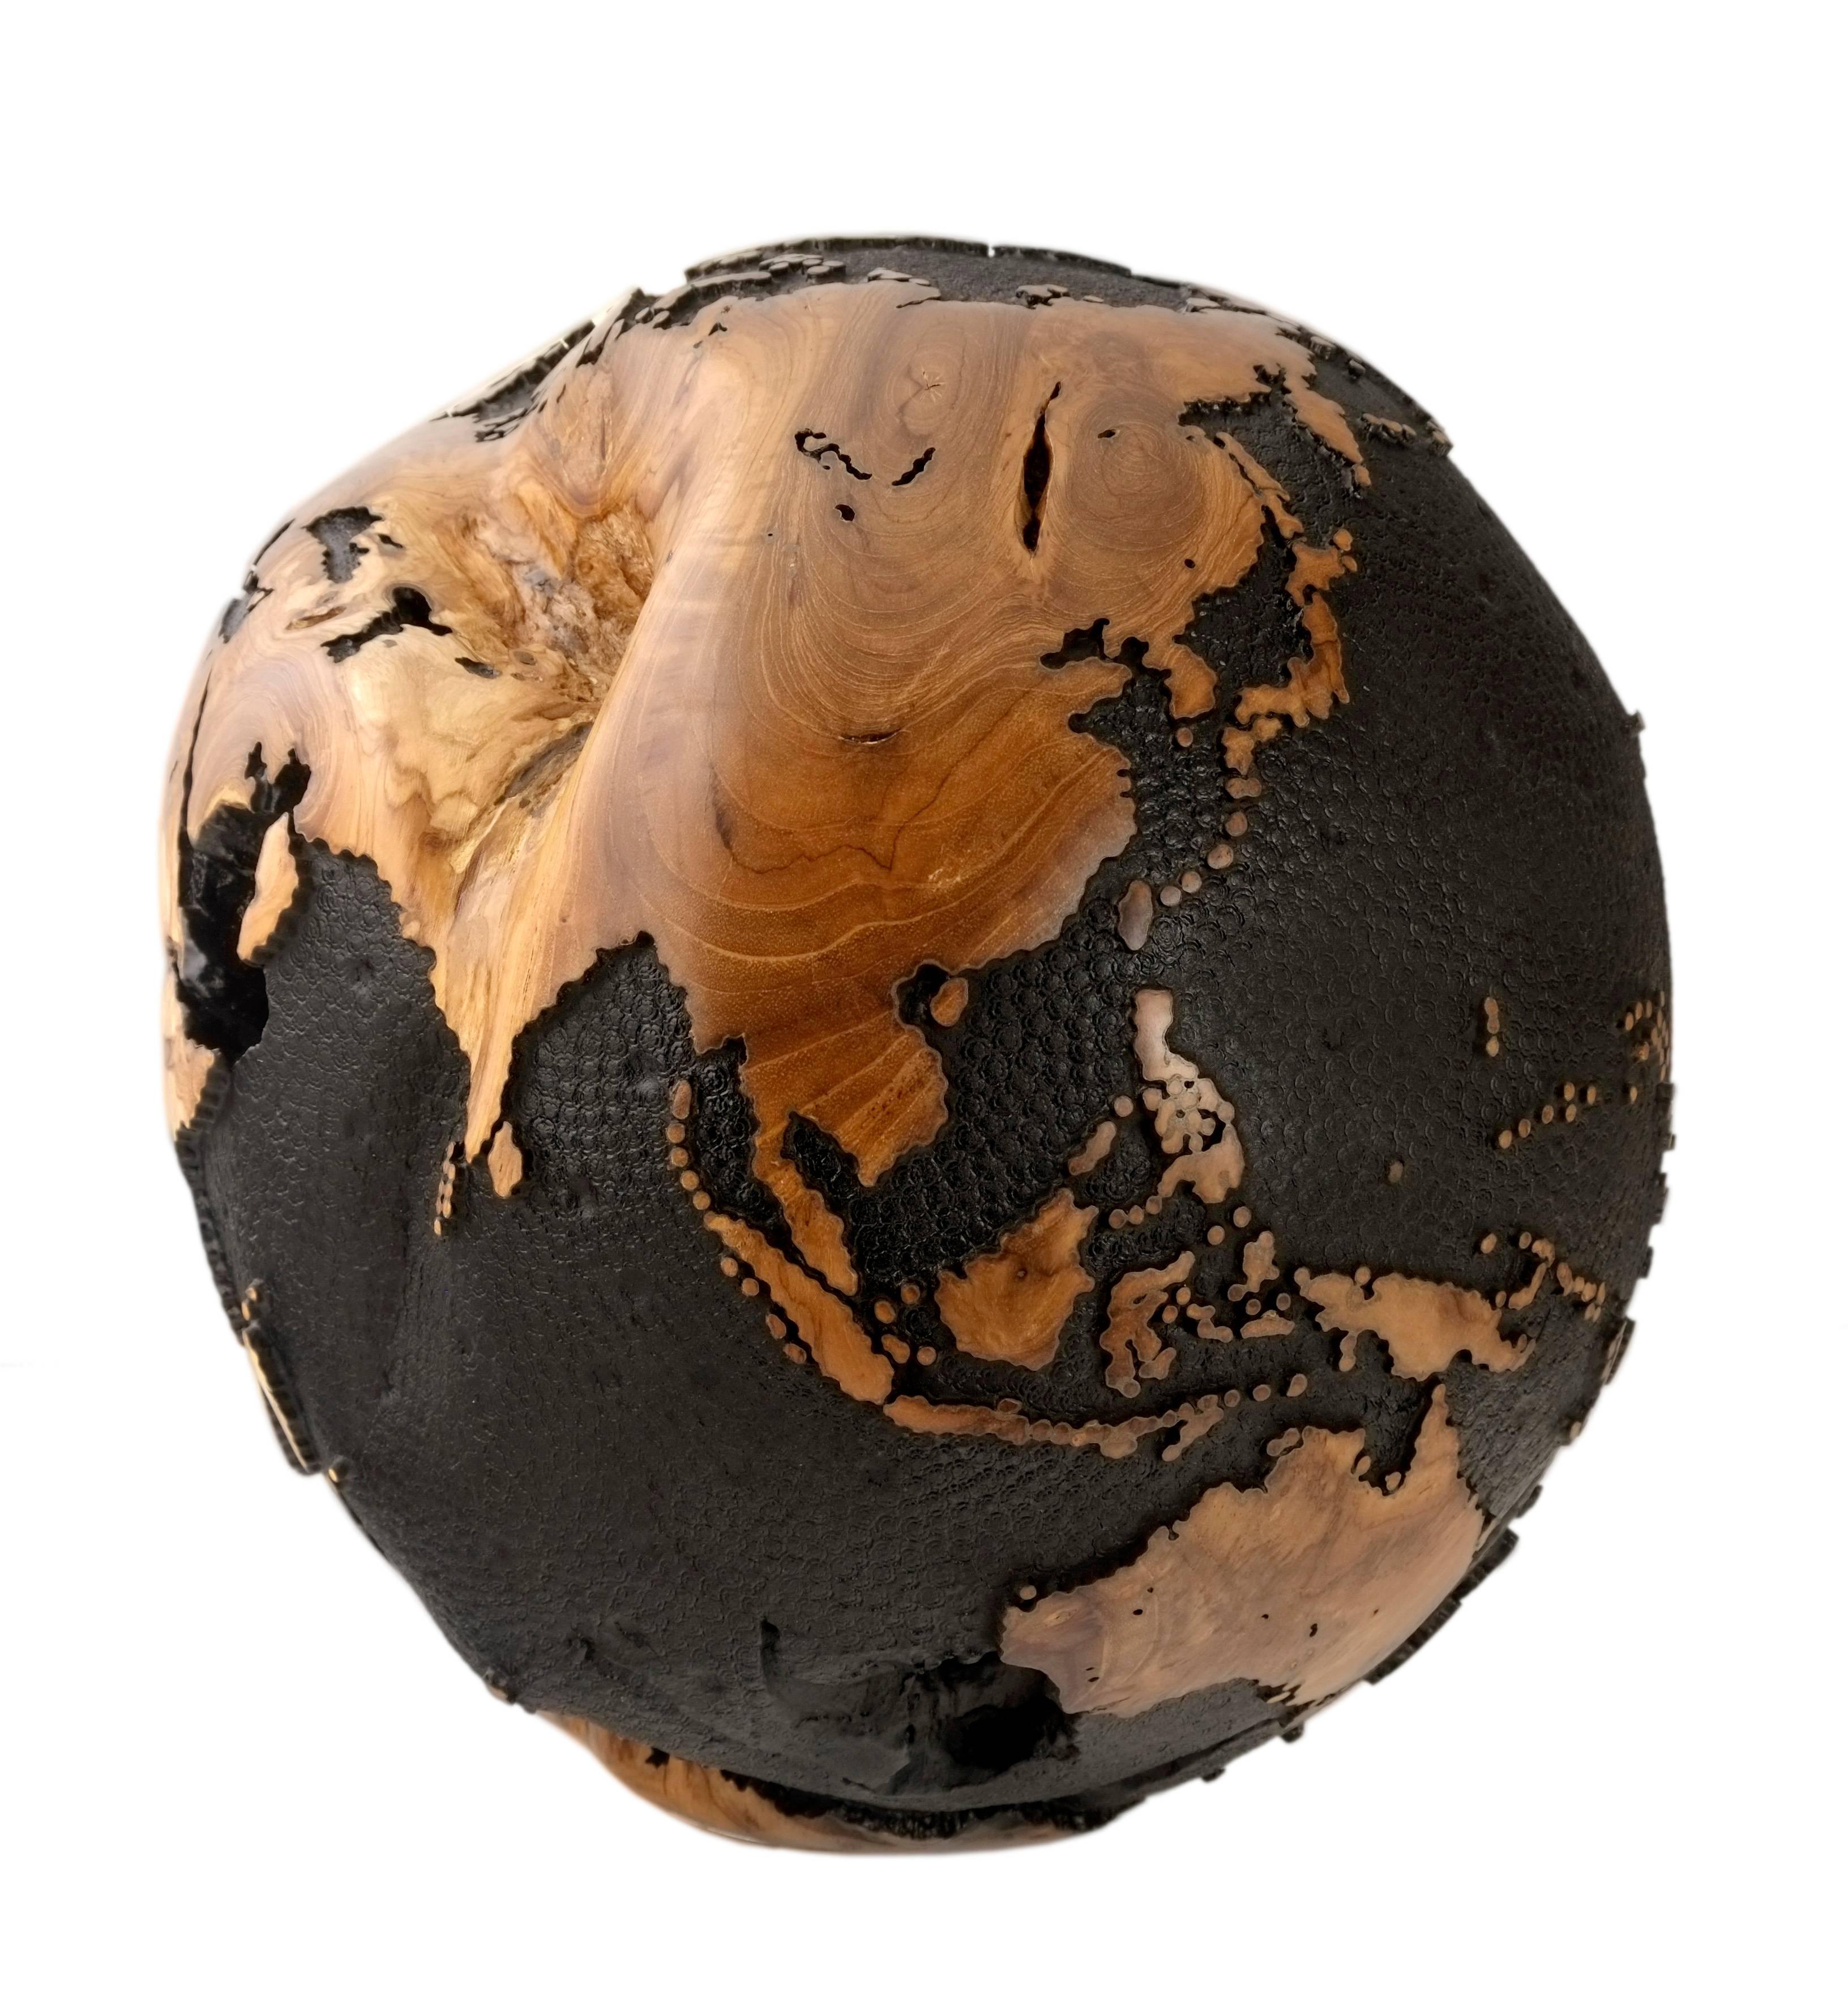 Every room needs a touch of black.

Superb black, hand-carved wooden globe made of teak root with cold iron layer and black paint, round hammered finishing. 

Dimension: 11.81 inches / 30 cm
Materials: Reclaimed teak root, cold iron layer,